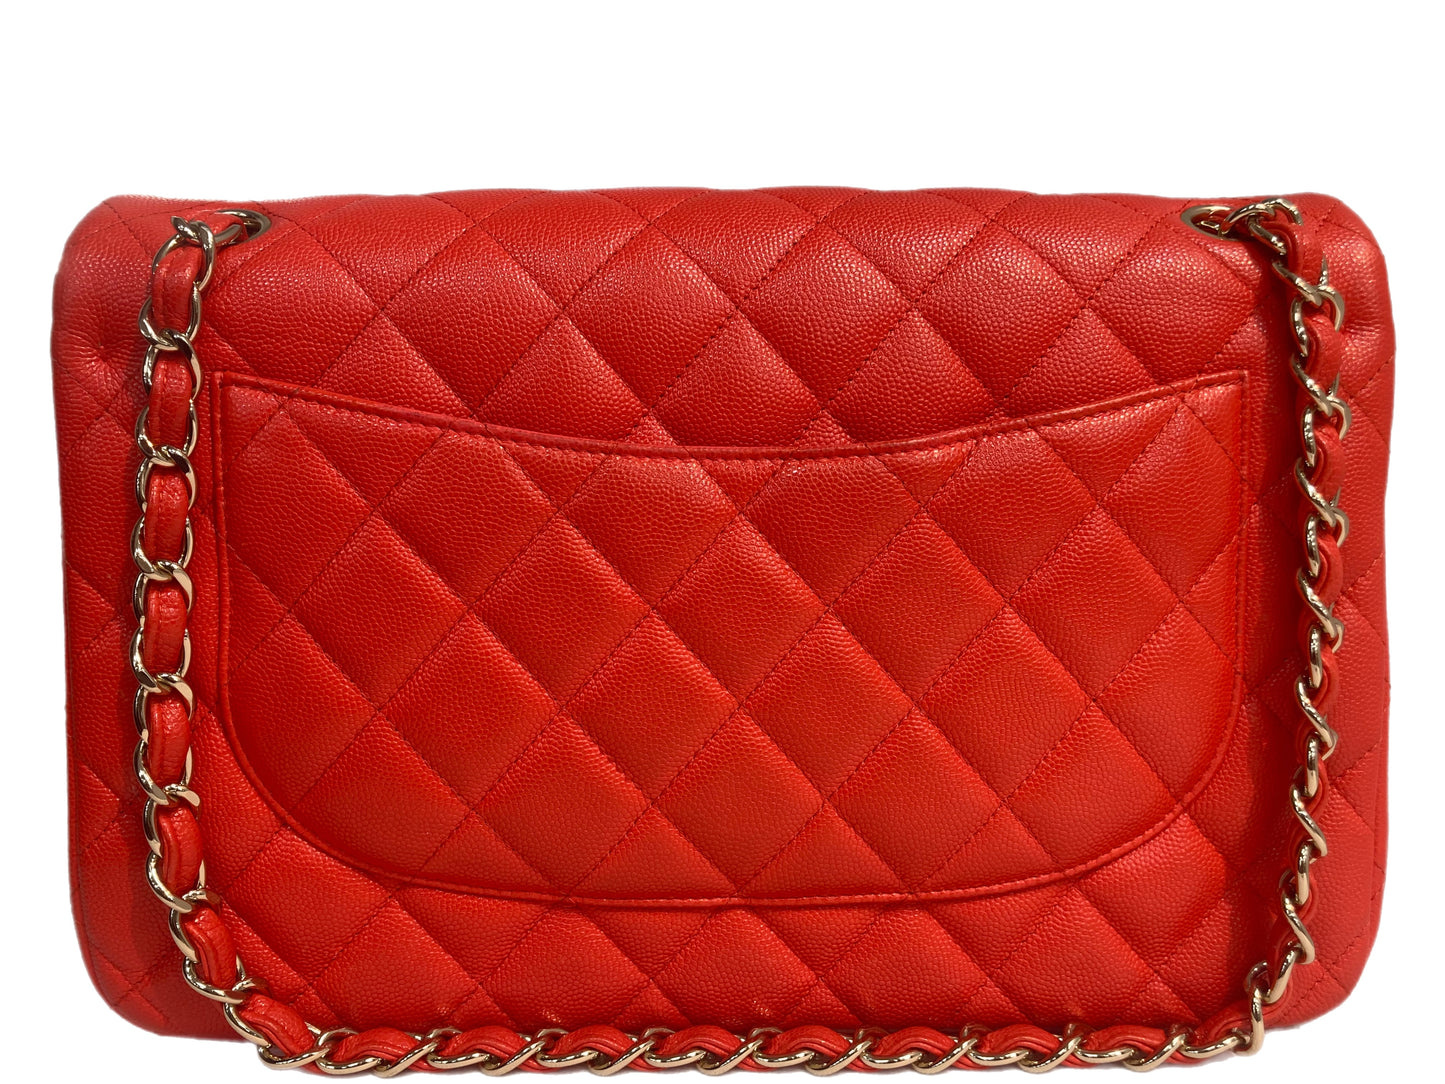 CHANEL Jumbo Caviar Leather Quilted Double Flap Handbag Orange/Red